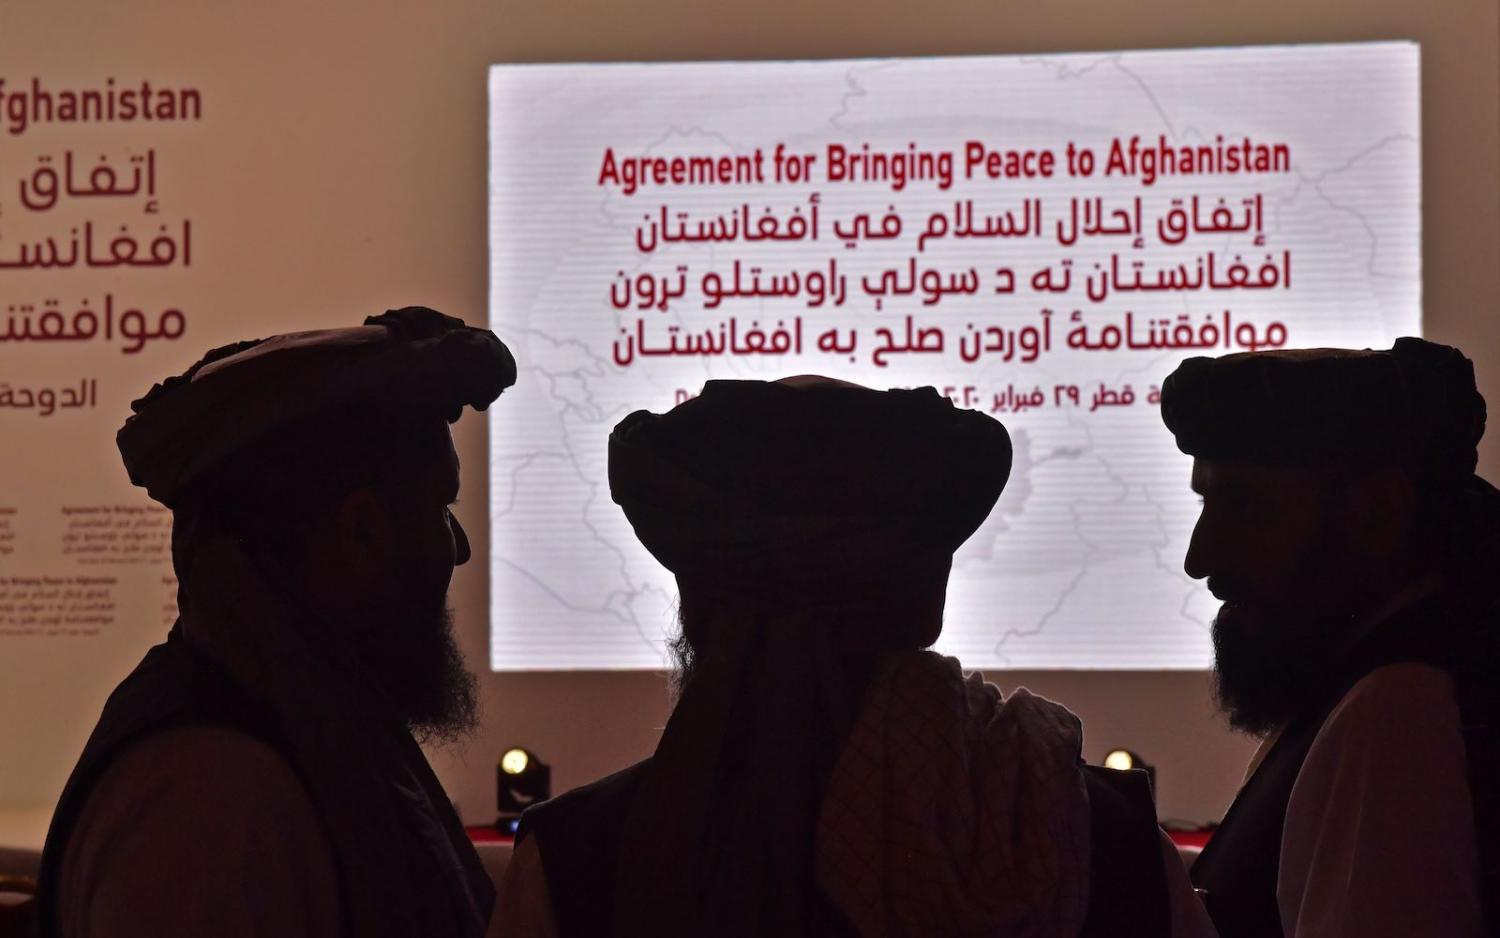 Members of the Taliban delegation attend the signing of a peace deal with the US, on 29 February 2020 in Doha, Qatar (Giuseppe Cacace/AFP via Getty Images)